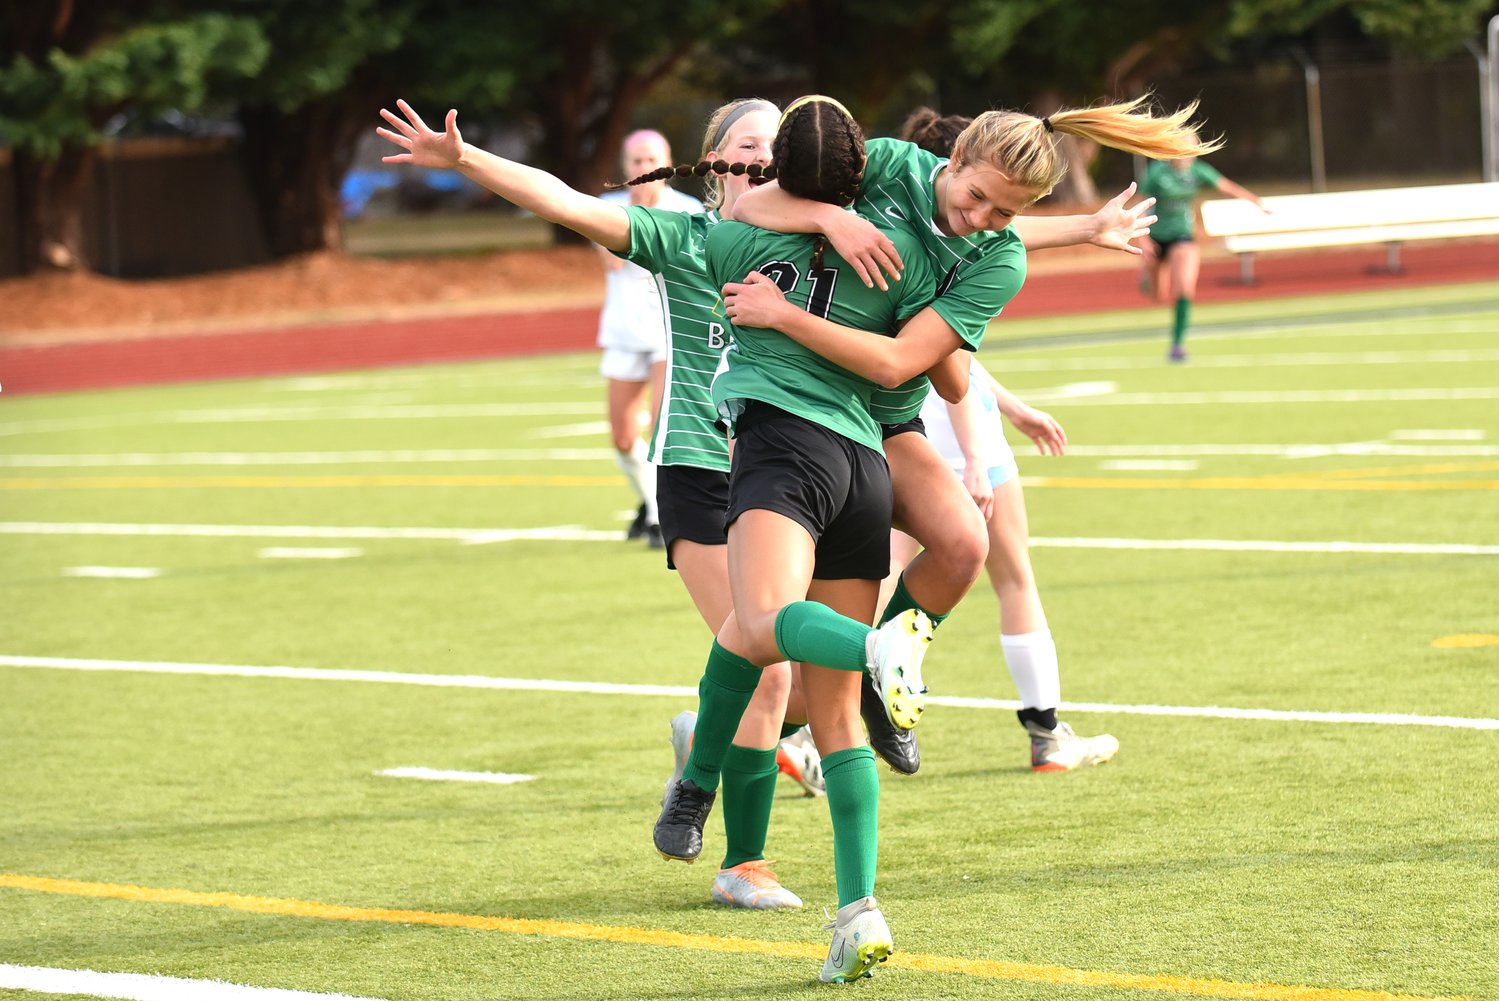 Tumwater's Ava Jones (21) celebrates with Emalyn Shaffer after the latter's goal put the Thunderbirds ahead 2-0 in their 6-0 win at home over Hockinson in the first round of the 2A District 4 tournament on Oct. 29.